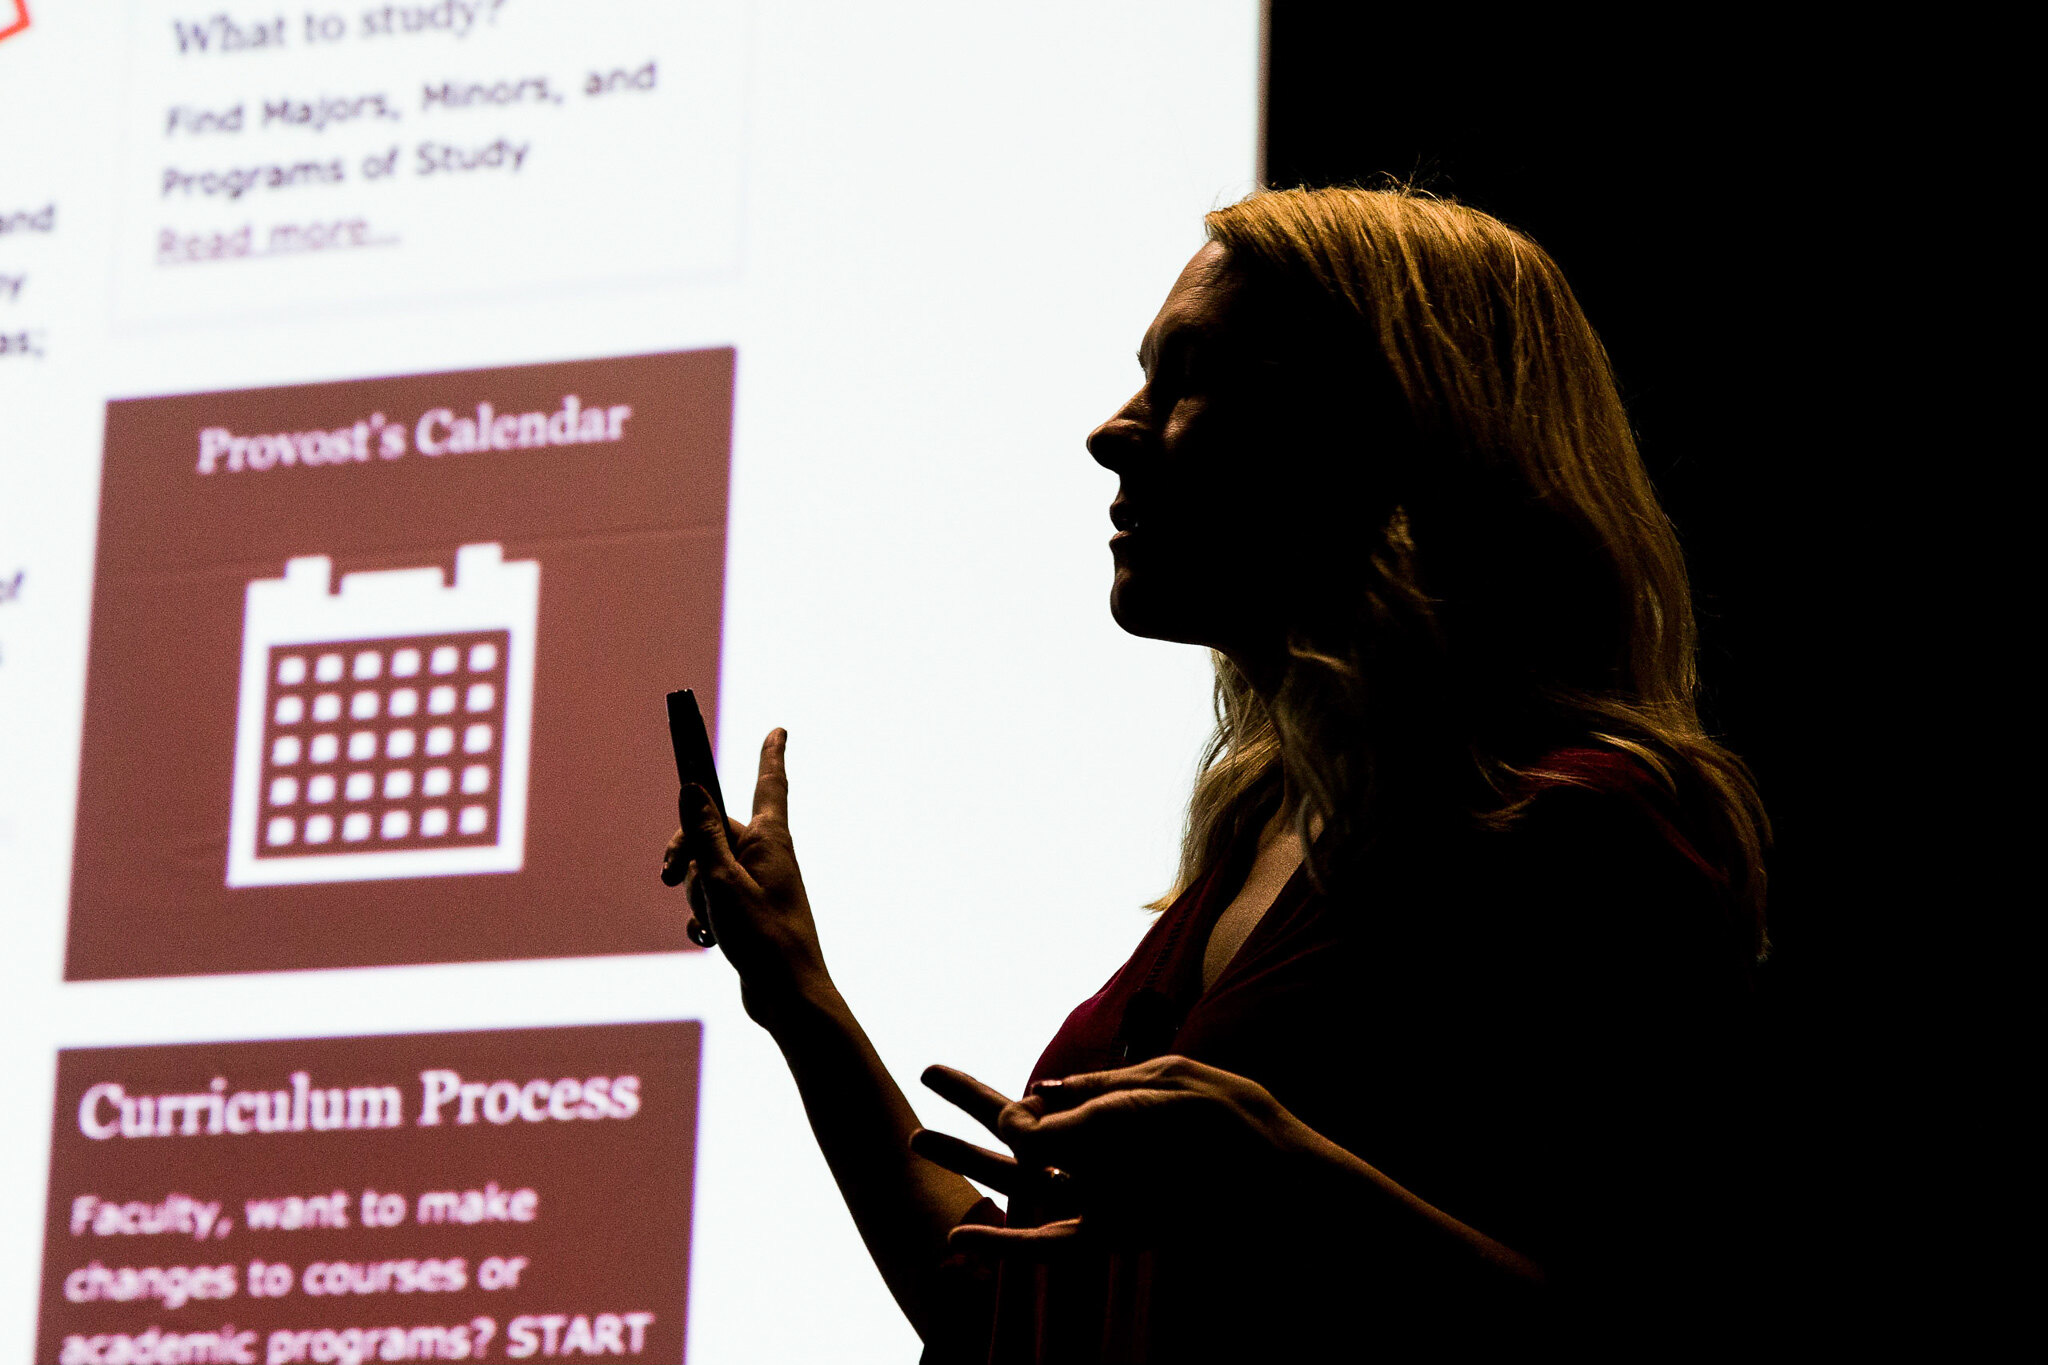 Meaghan Milliorn Fikes presents, with an screen image of a provost's calendar in the background, at the HighEdWeb 2019 conference